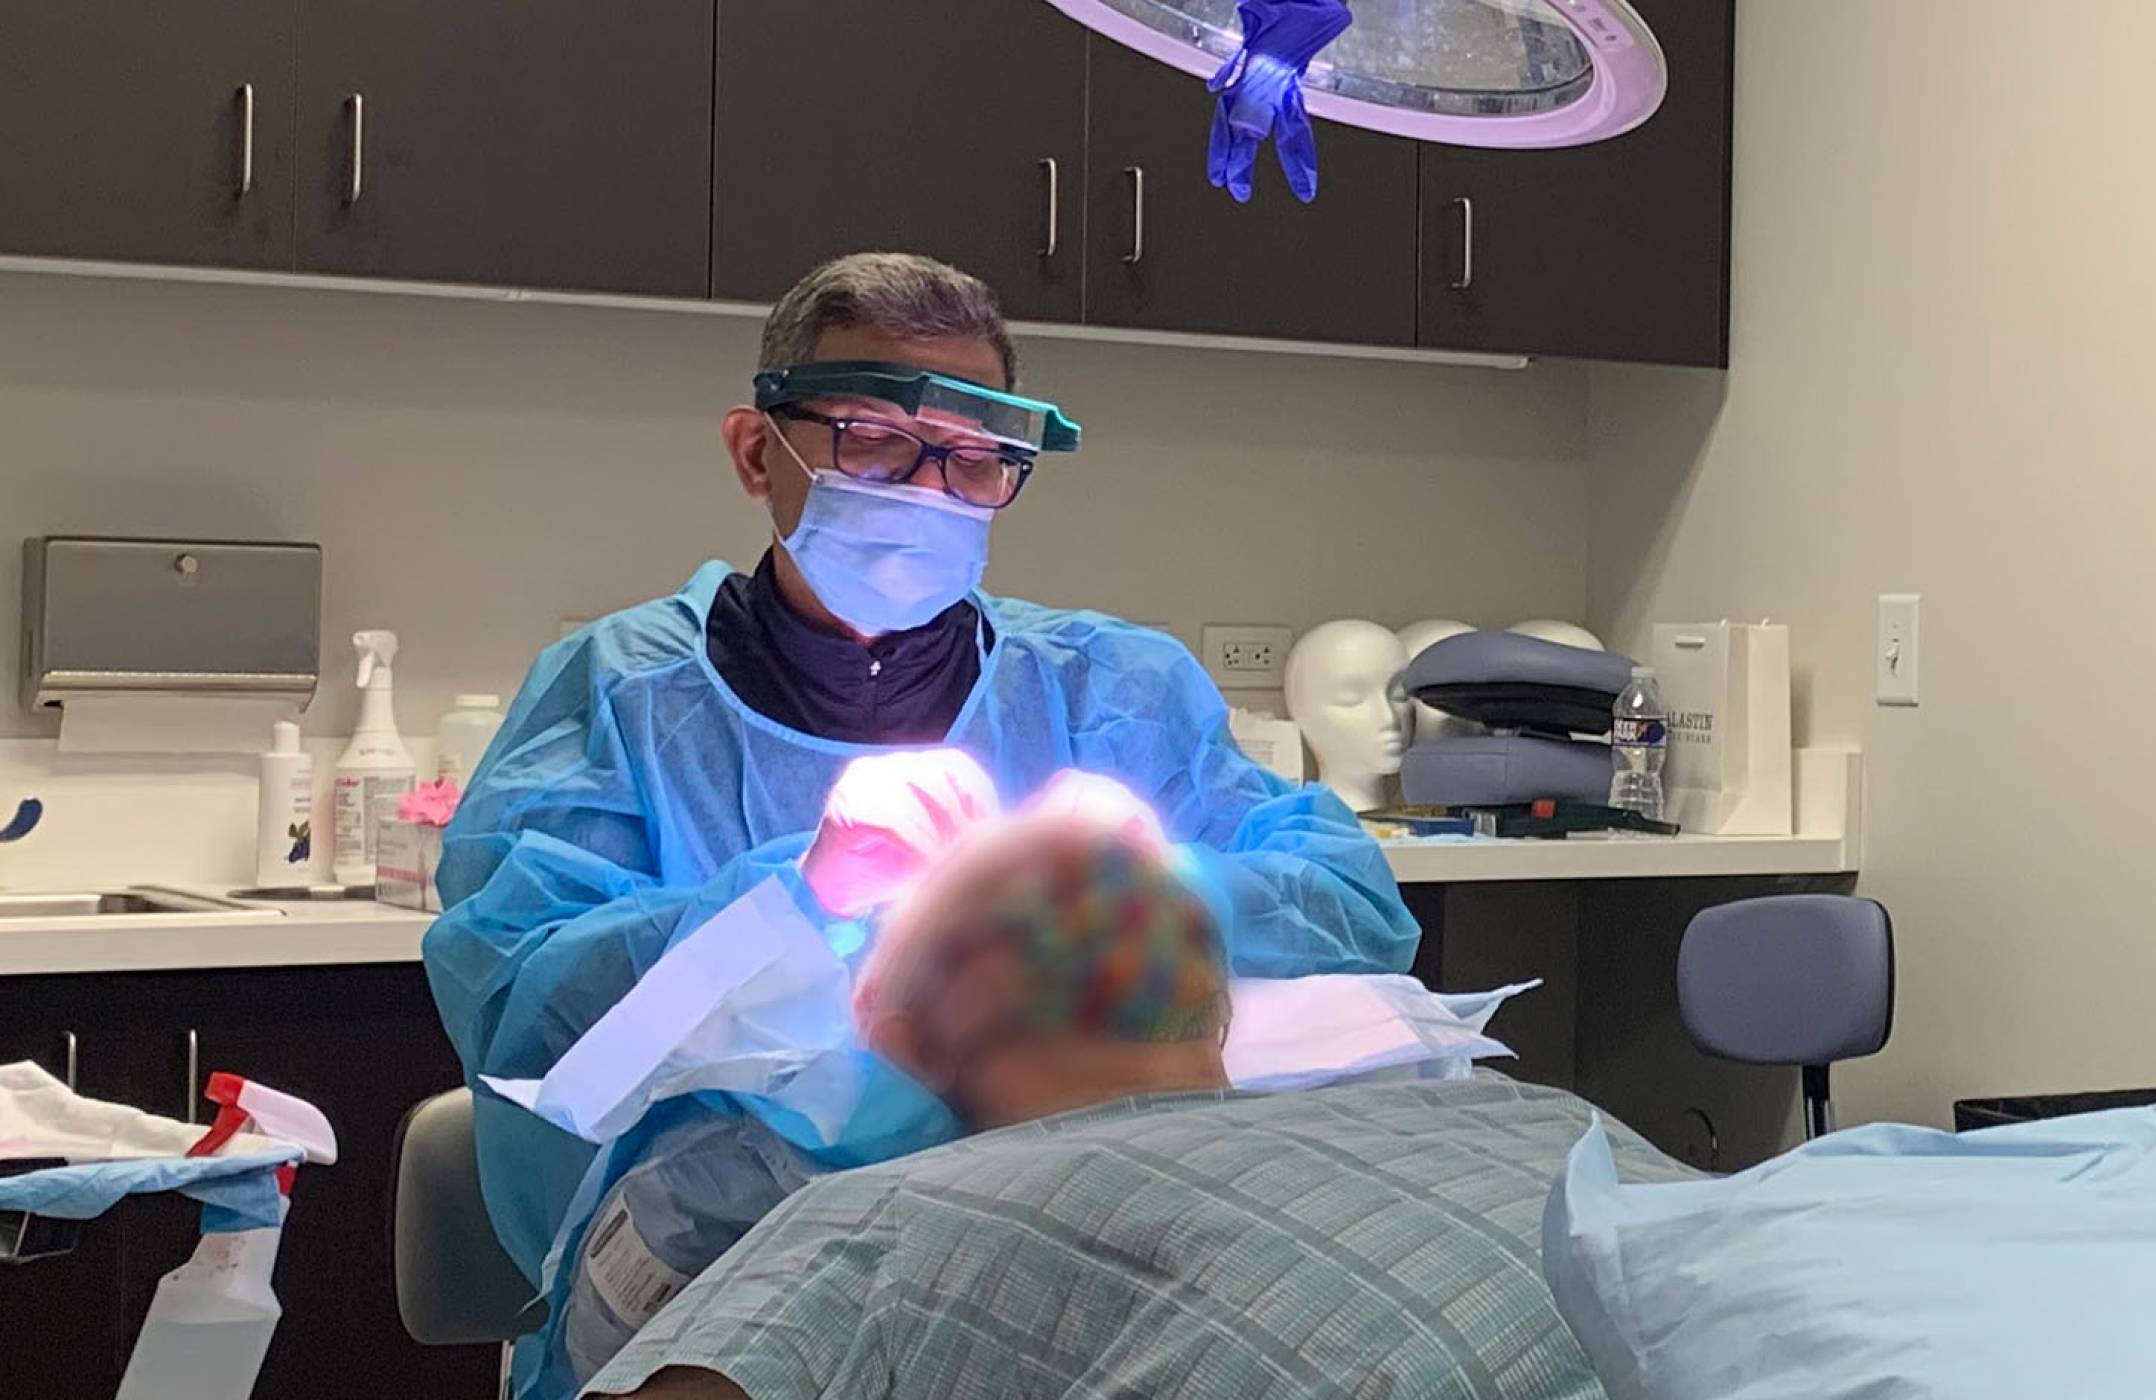 Dr. Zack Charkawi is performing a hair transplant surgery in the operating room of the clinic. Two of his team
                            remembers are working by his side. The patient's face is blurred out.